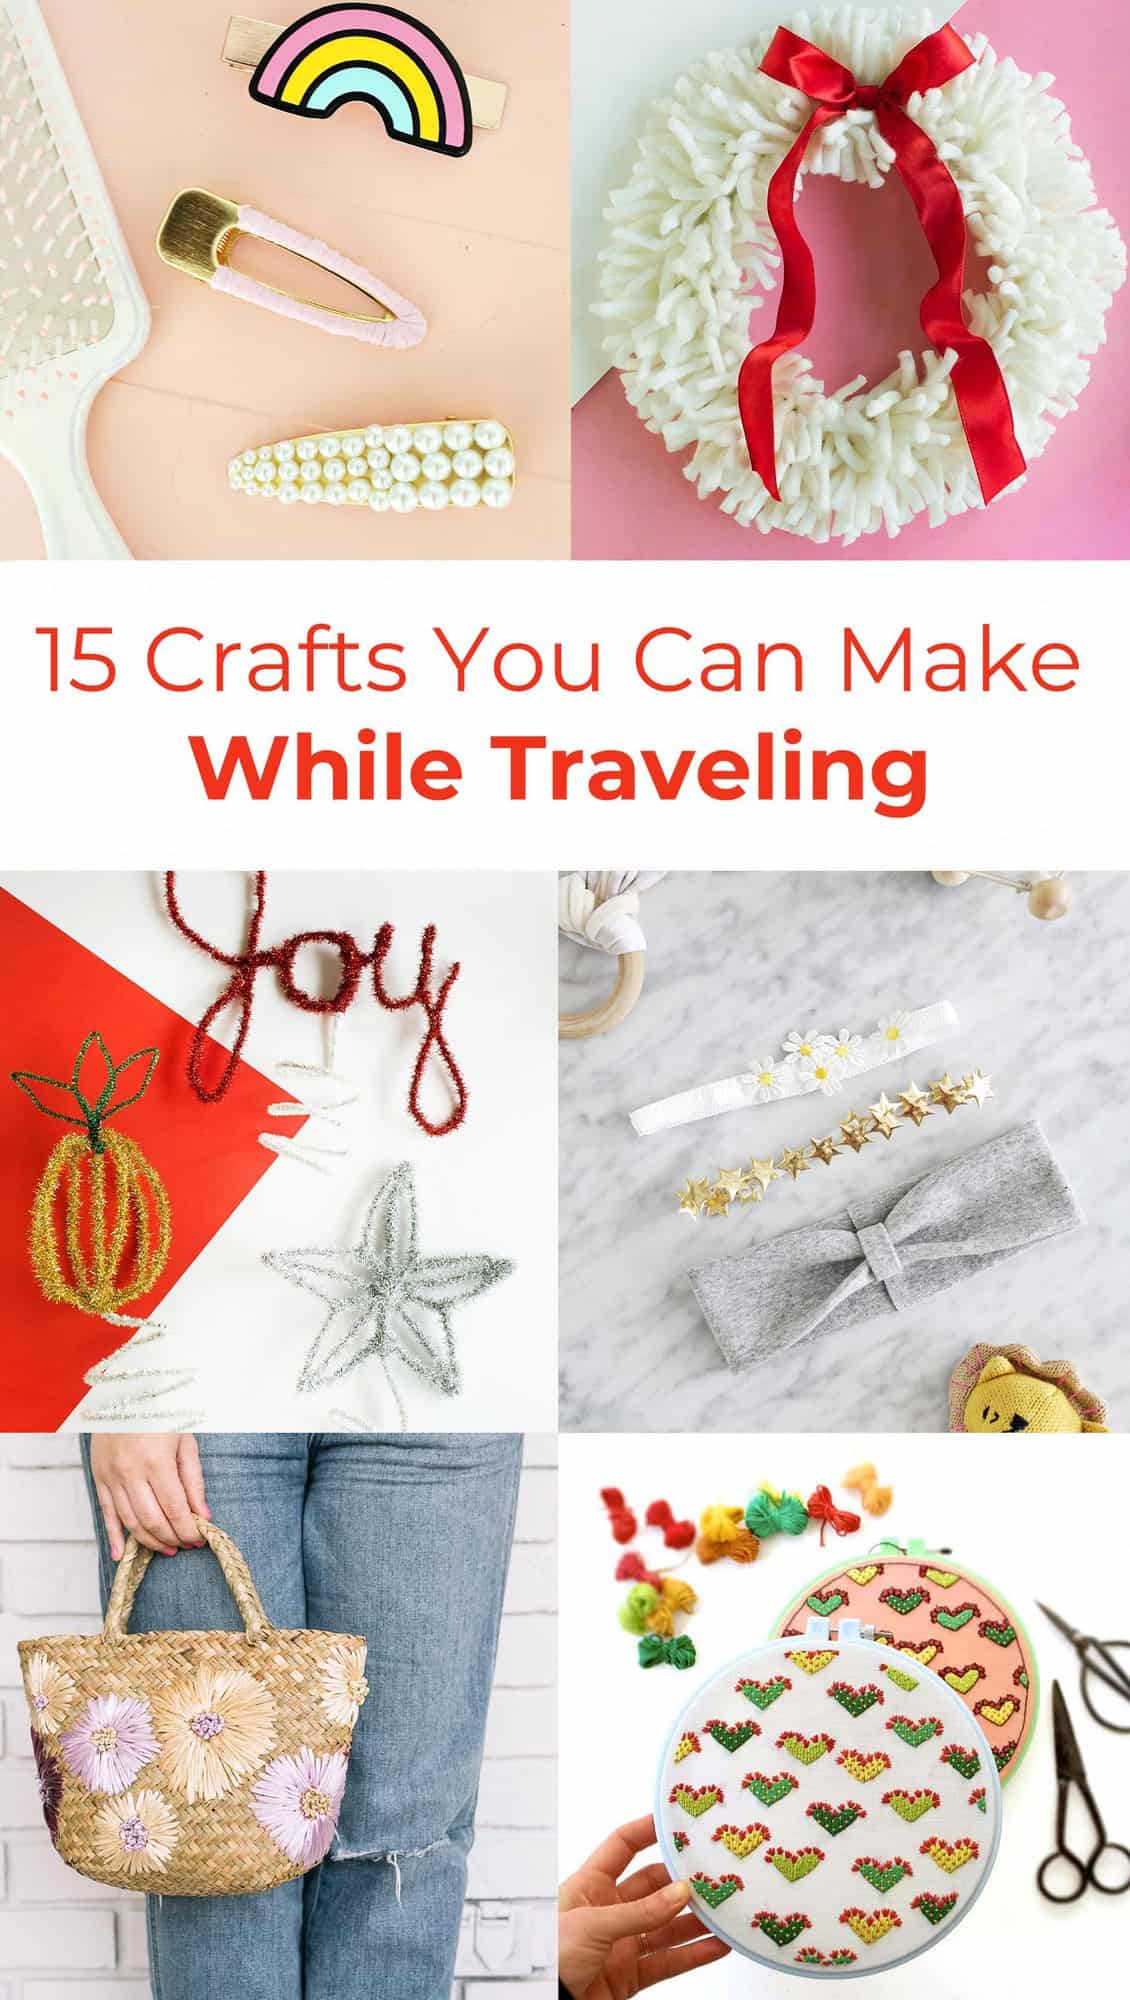 https://abeautifulmess.com/wp-content/uploads/2019/11/15-crafts-you-can-make-while-traveling.jpg